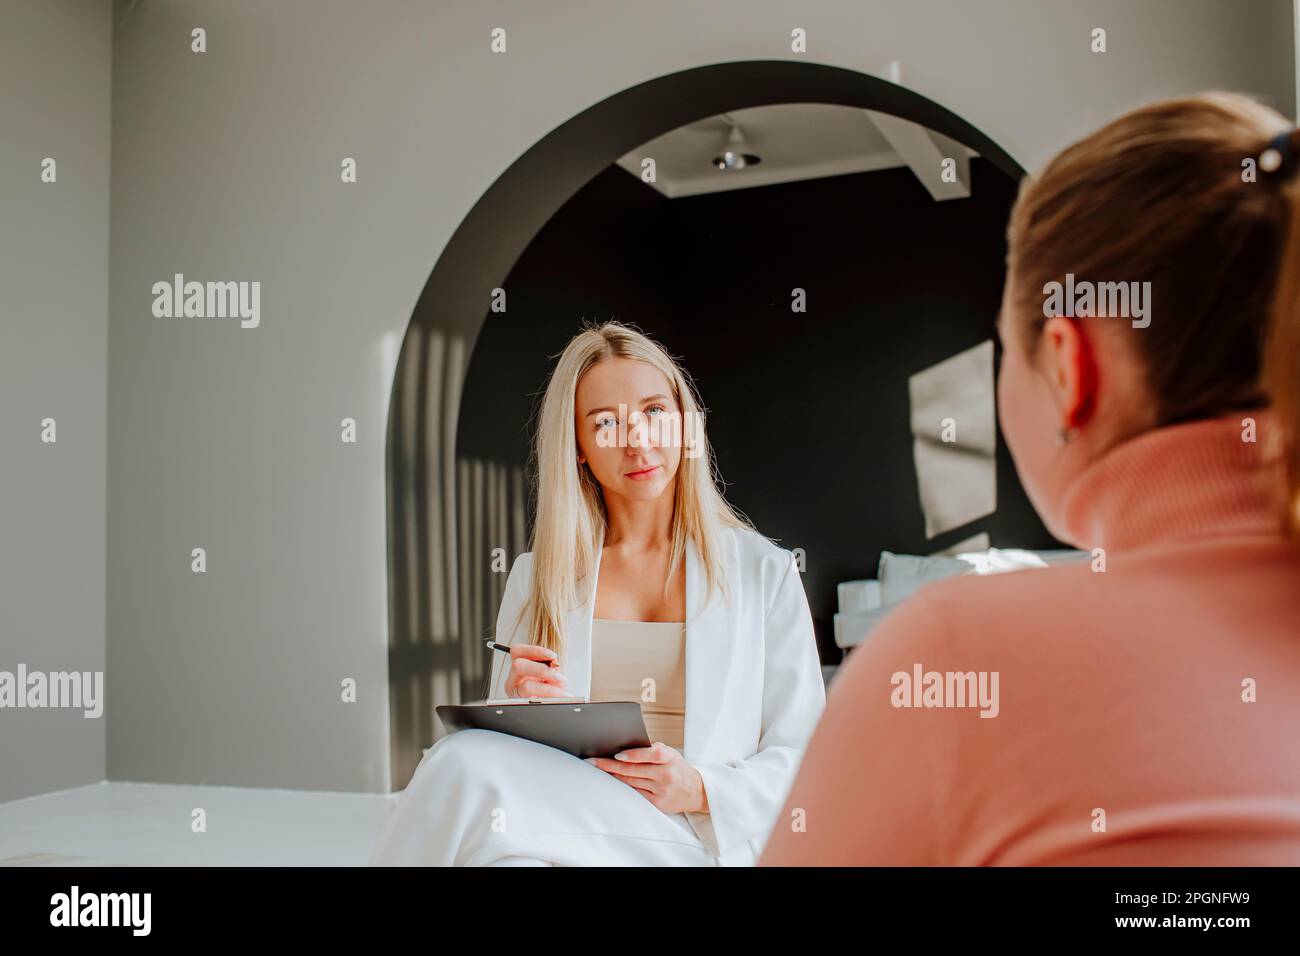 Psychologist taking notes in counseling session at clinic Stock Photo